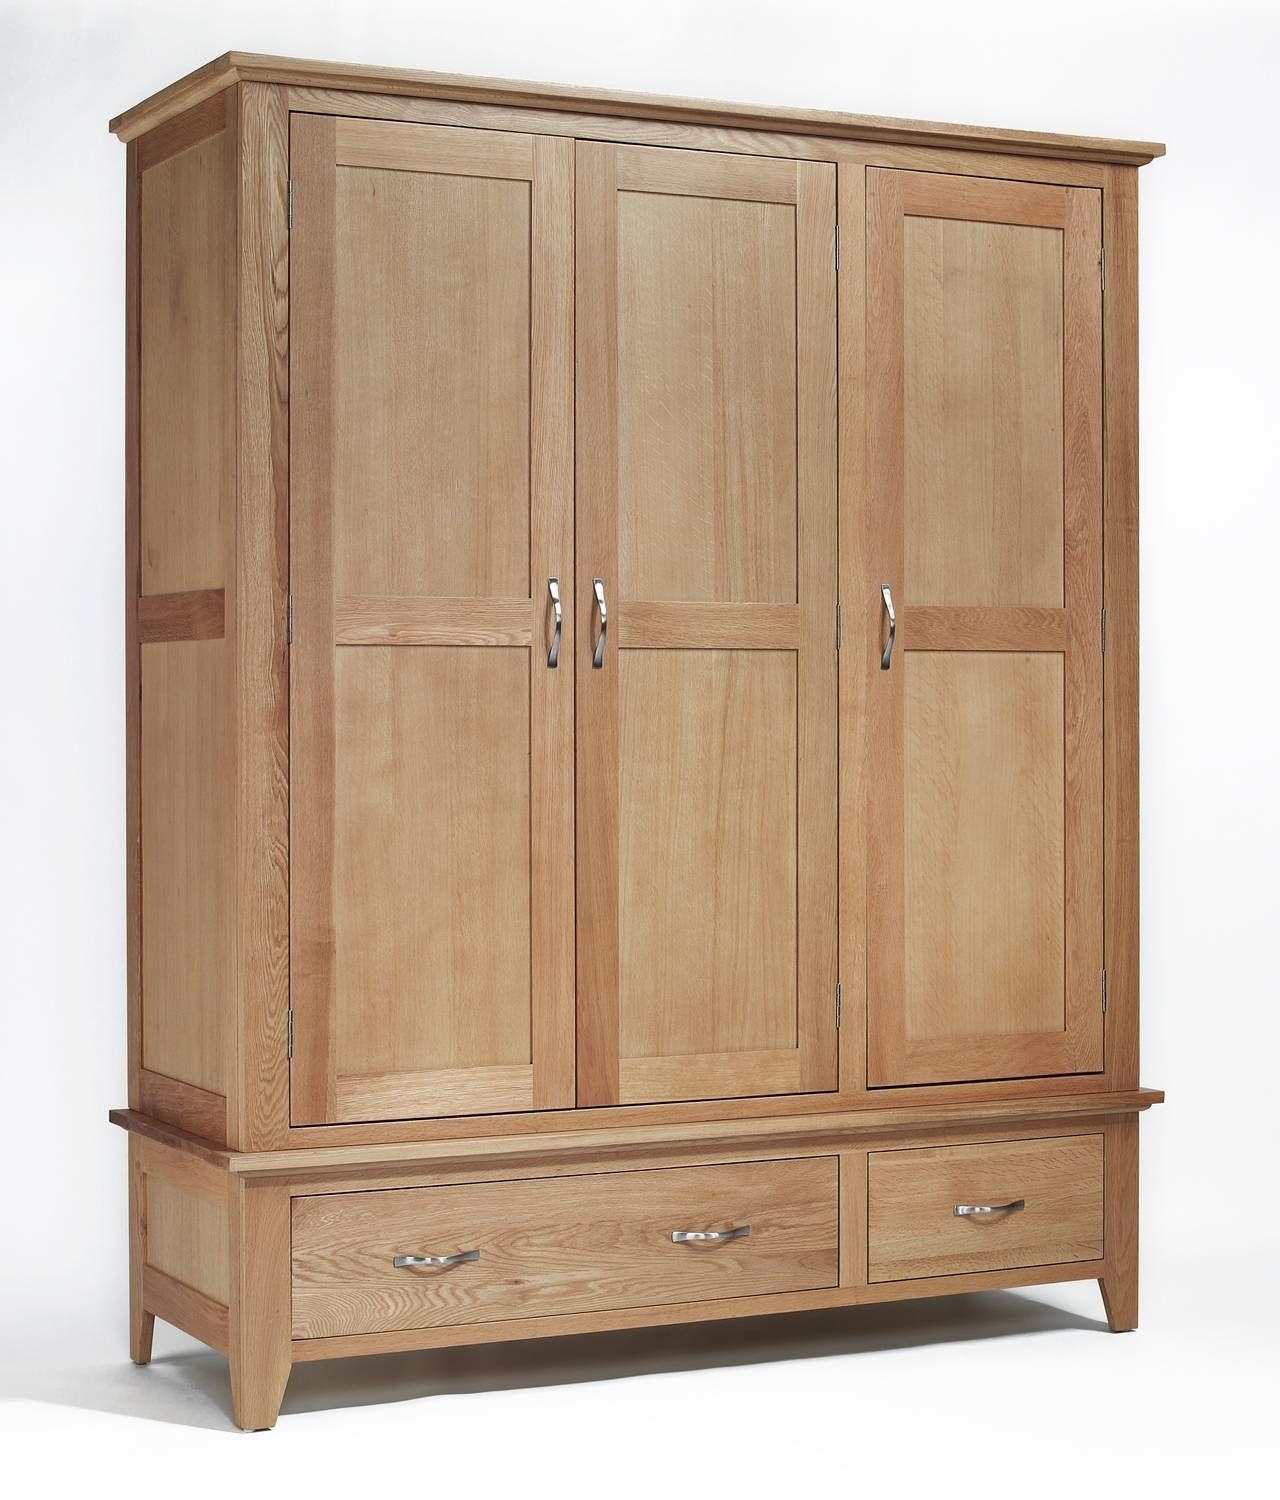 Solid Oak Wardrobes | Painted & Walnut Wardrobes | Free Delivery Within Wood Wardrobes (View 14 of 15)